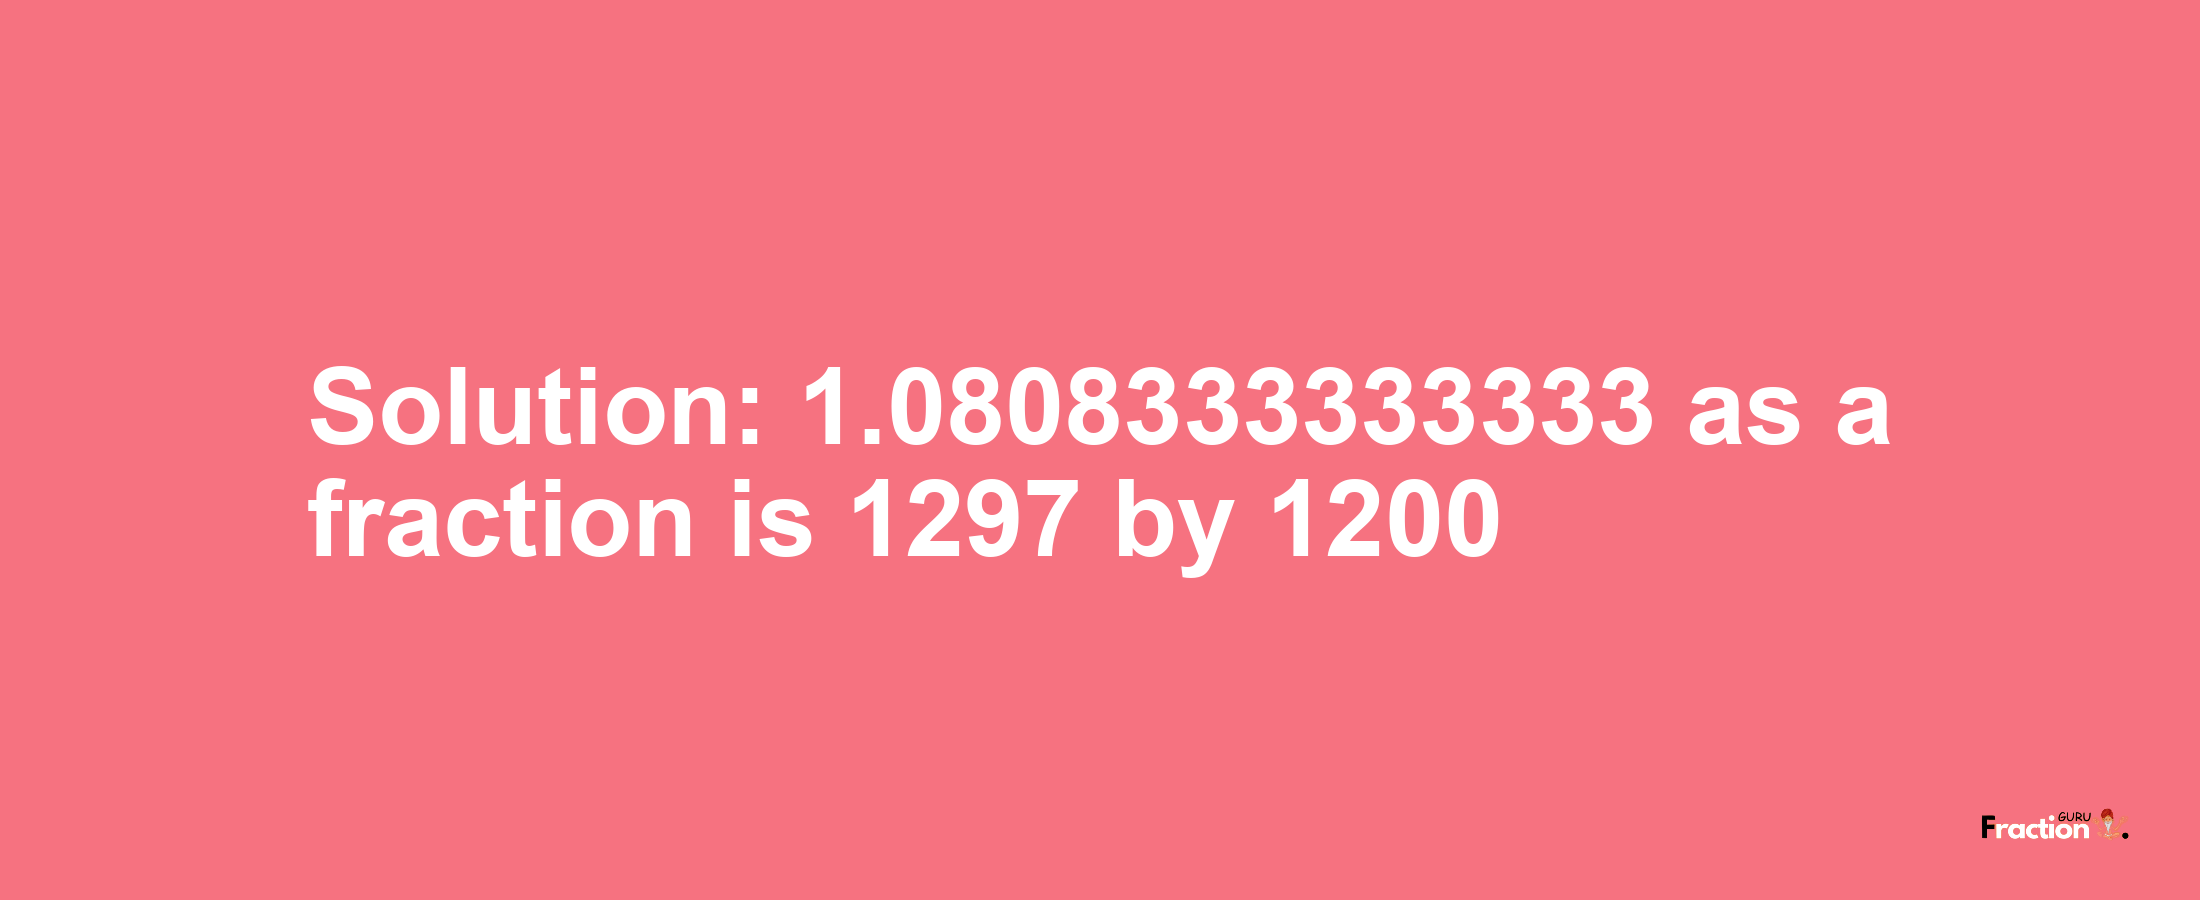 Solution:1.0808333333333 as a fraction is 1297/1200